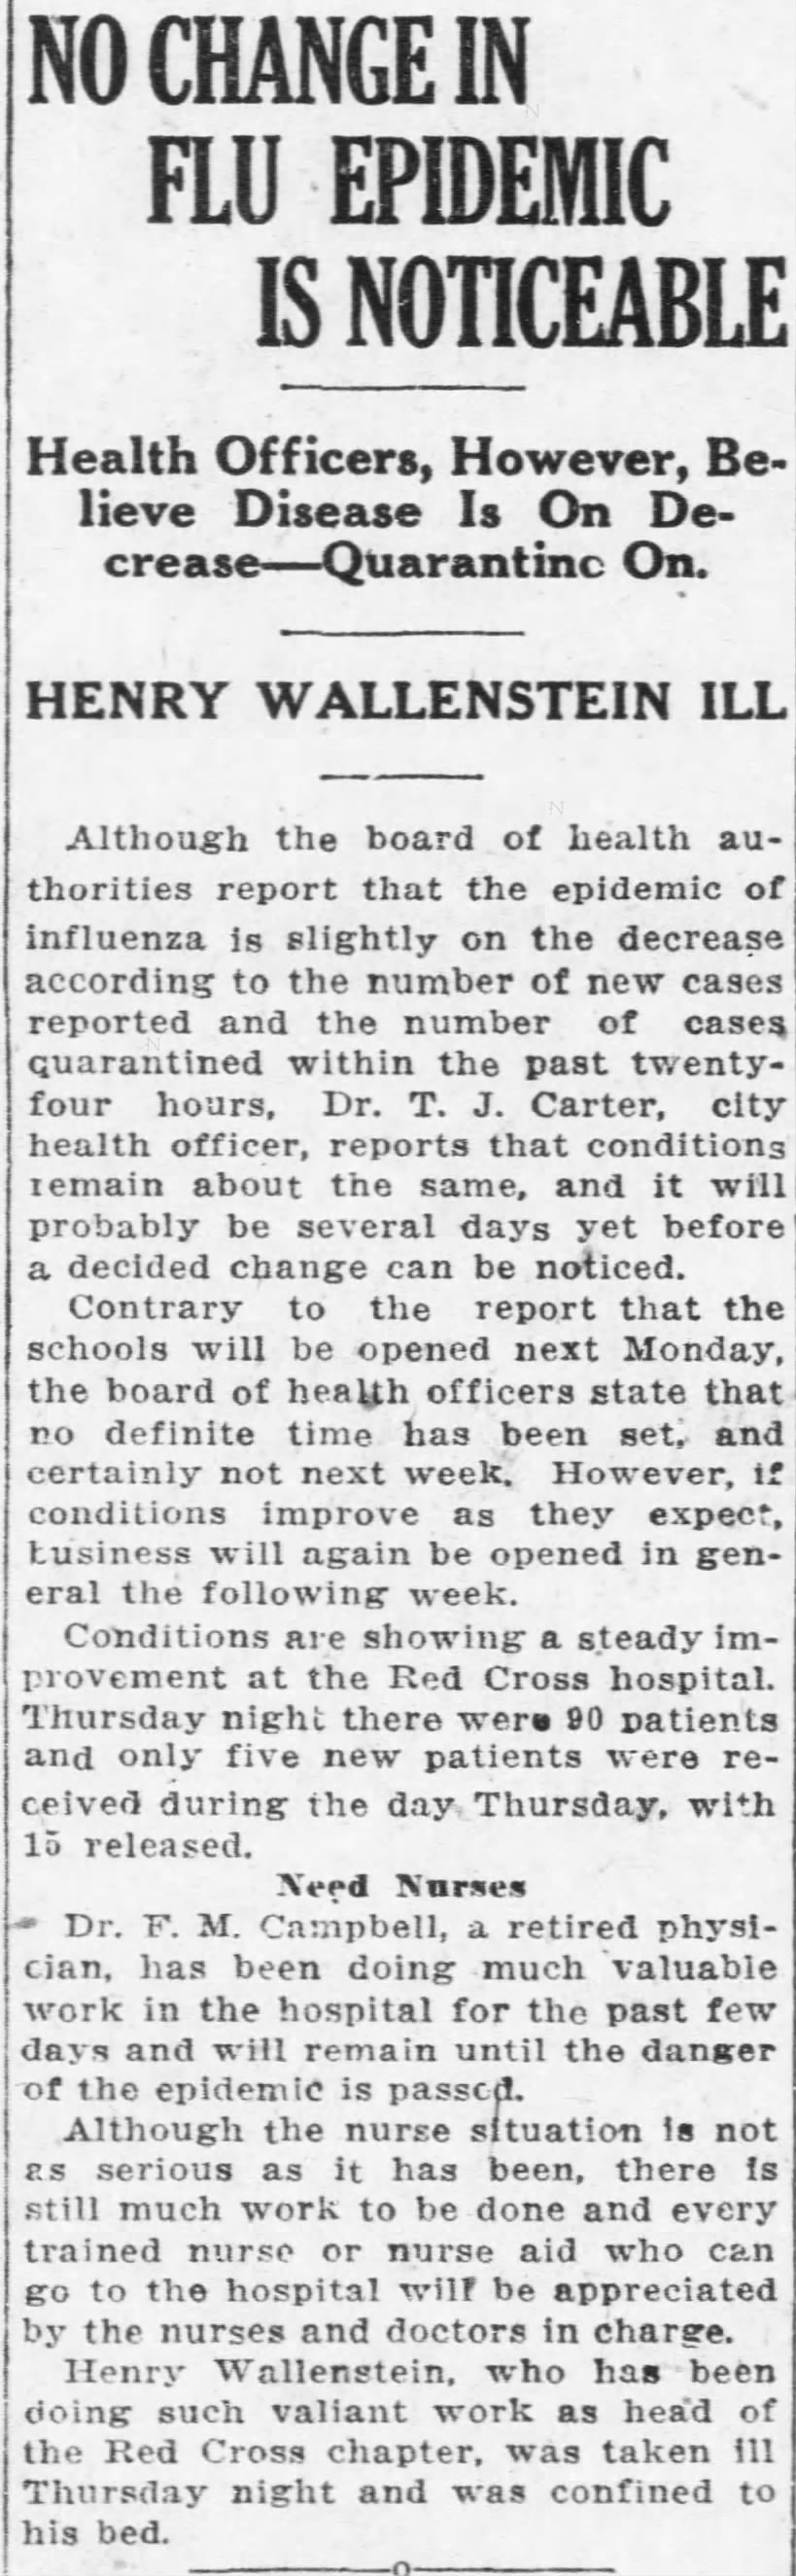 Kansas newspaper says "no change in flu epidemic is noticeable" in October 1918; Nurses are needed